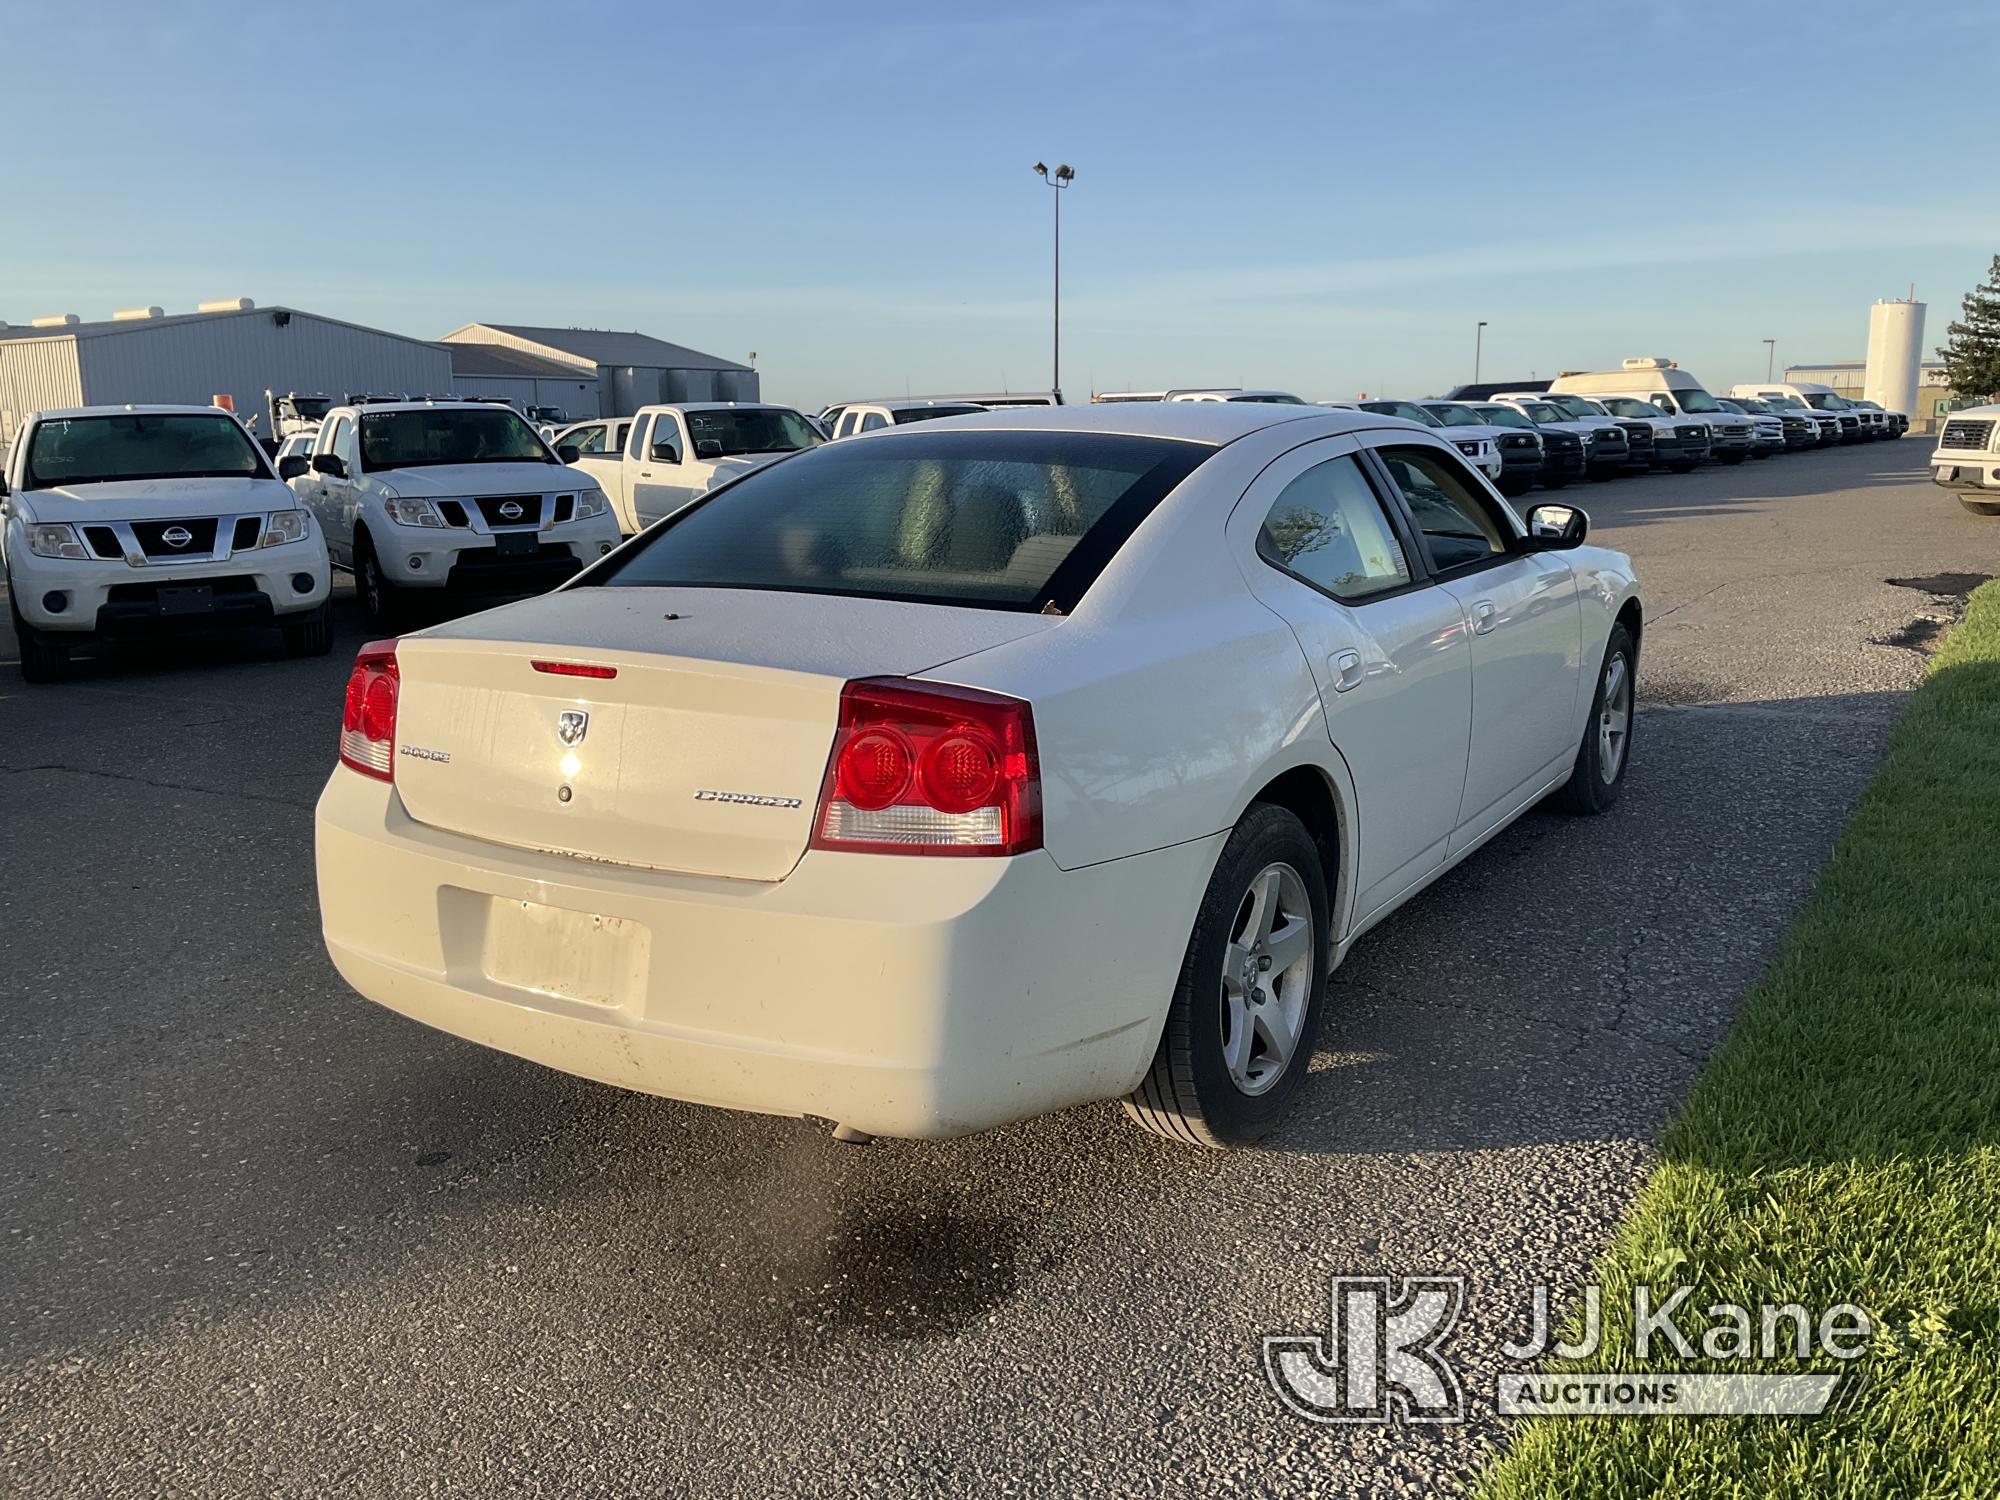 (Dixon, CA) 2010 Dodge Charger 4-Door Sedan Runs & Moves) (Has Electrical Problems, ABS Light On